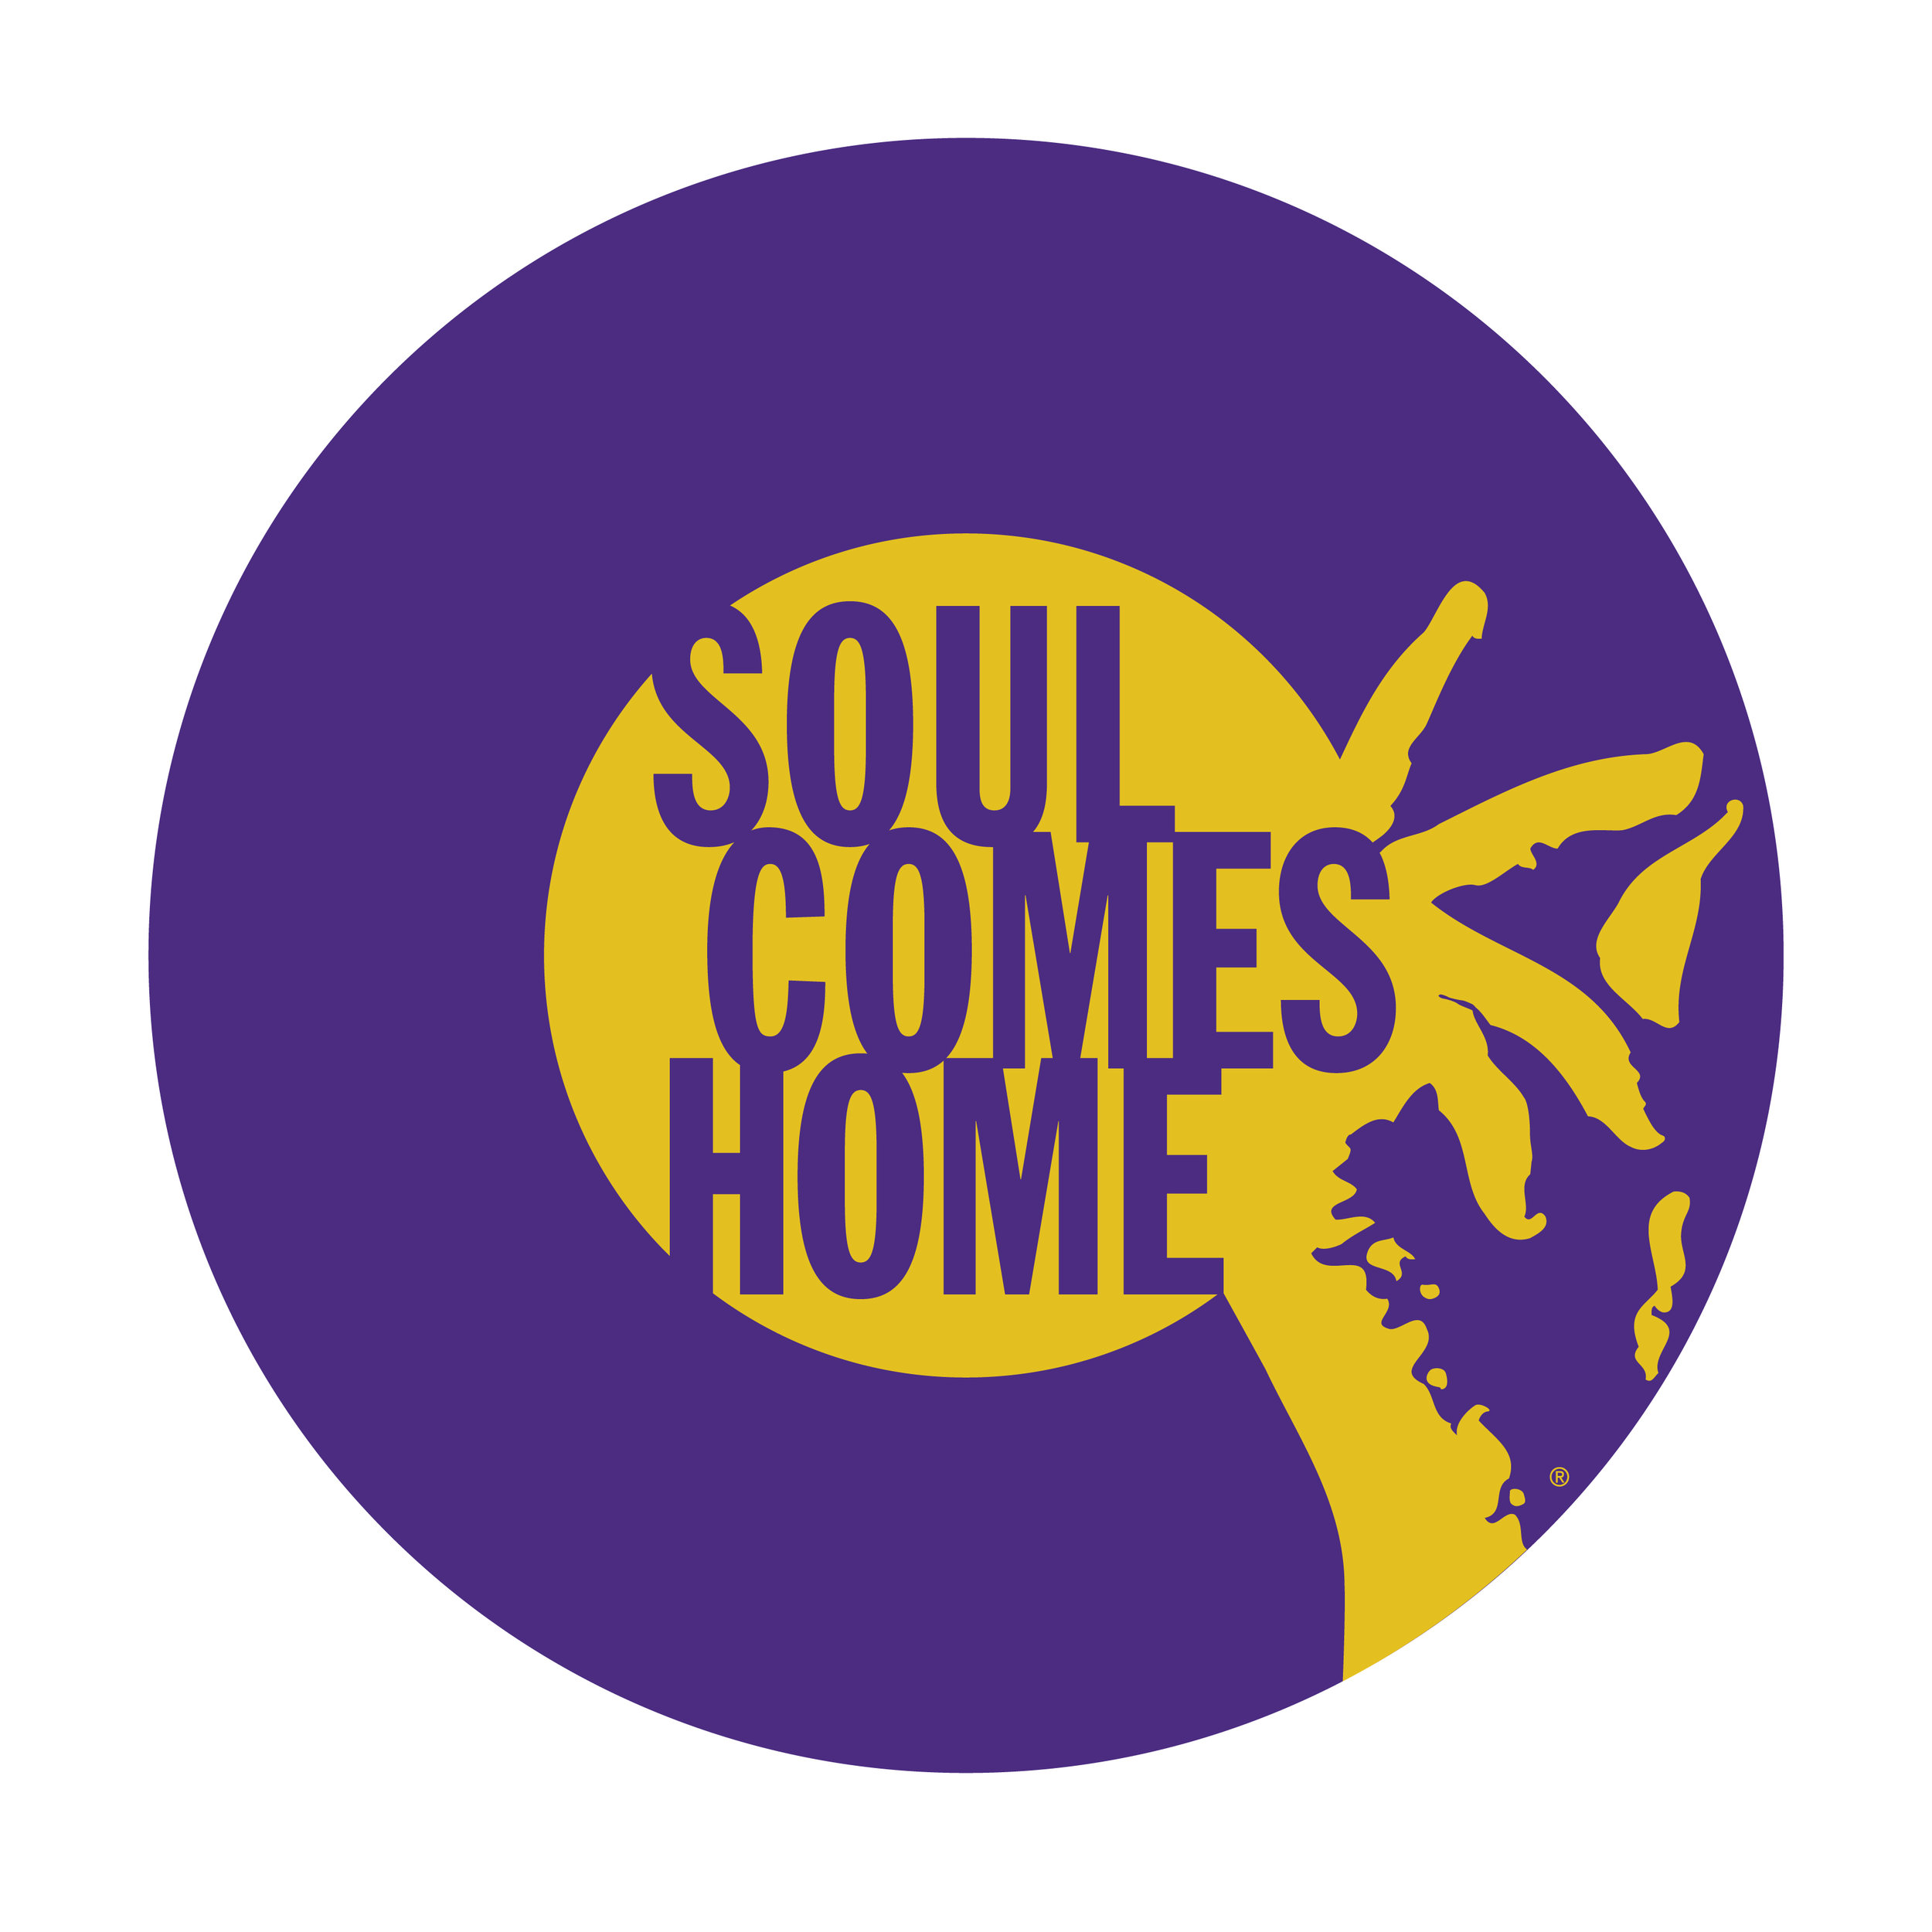  Soul Comes Home event and merchandise logo  Branding creative and design by Chuck Mitchell 